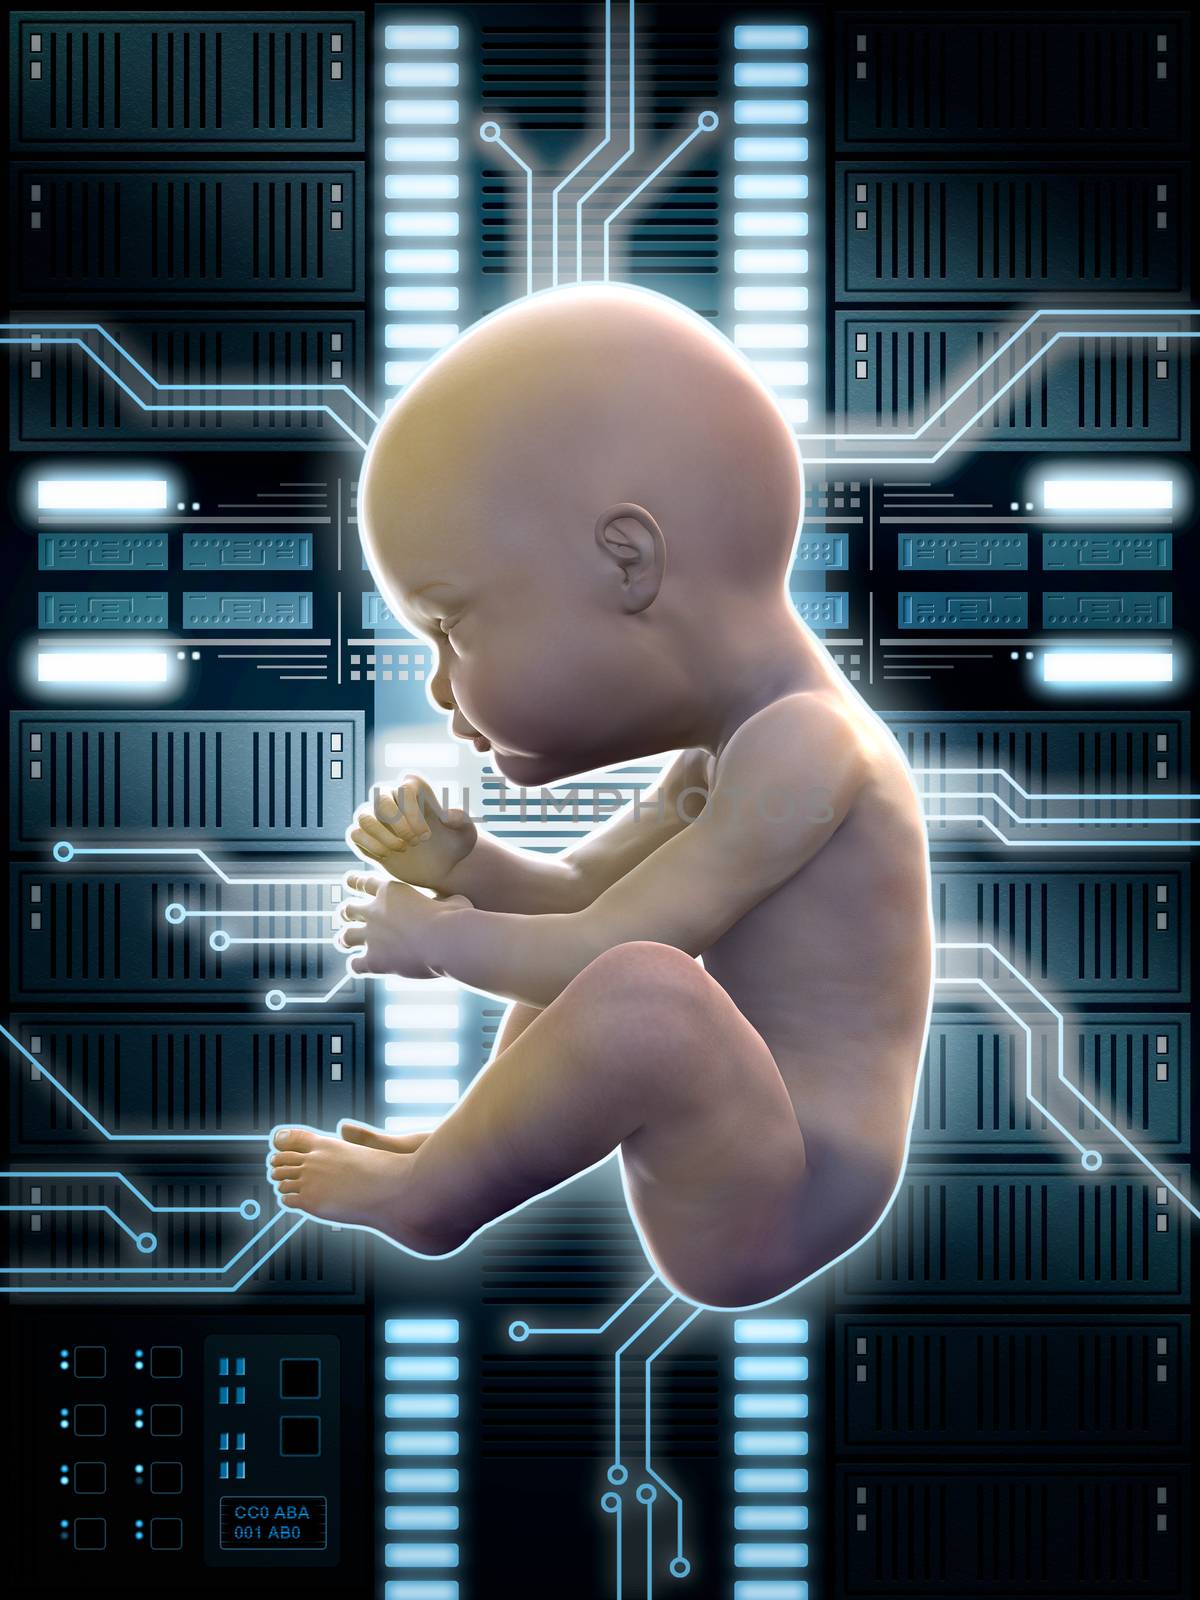 Human fetus connected to a computer server. Digital illustration.